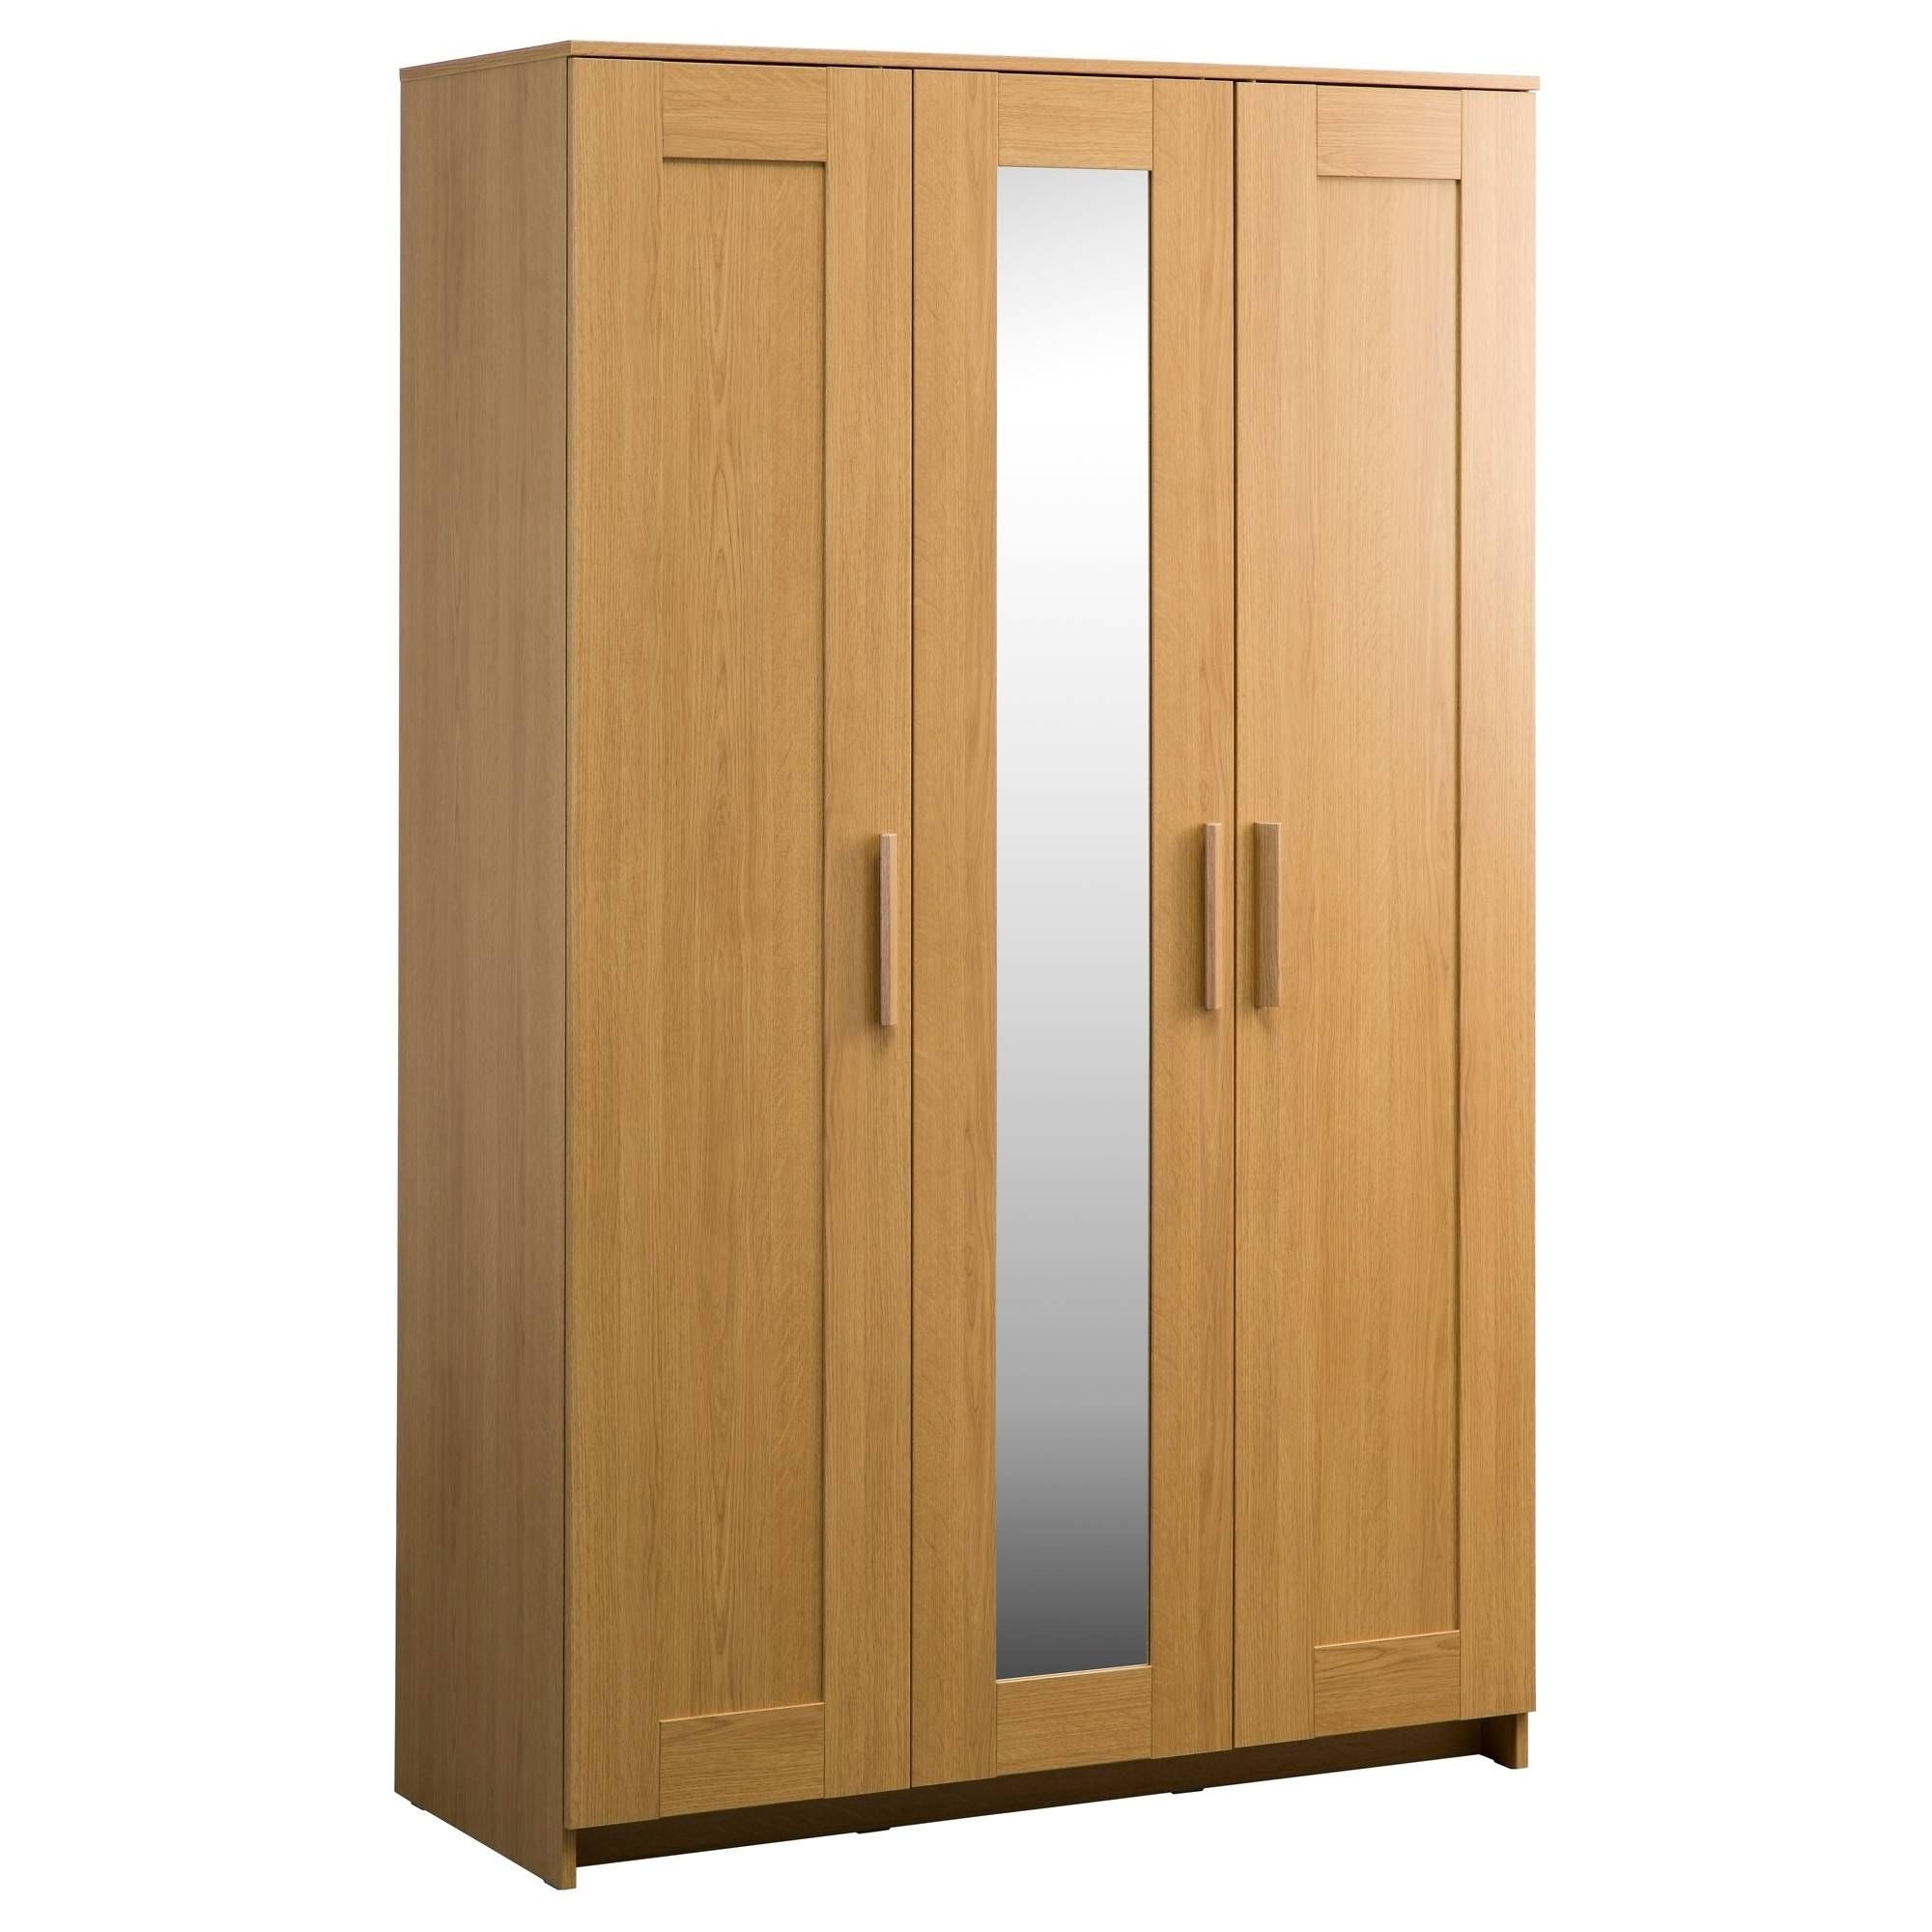 Well Liked Amazing Bargain Wardrobes – Buildsimplehome Intended For Bargain Wardrobes (View 1 of 15)